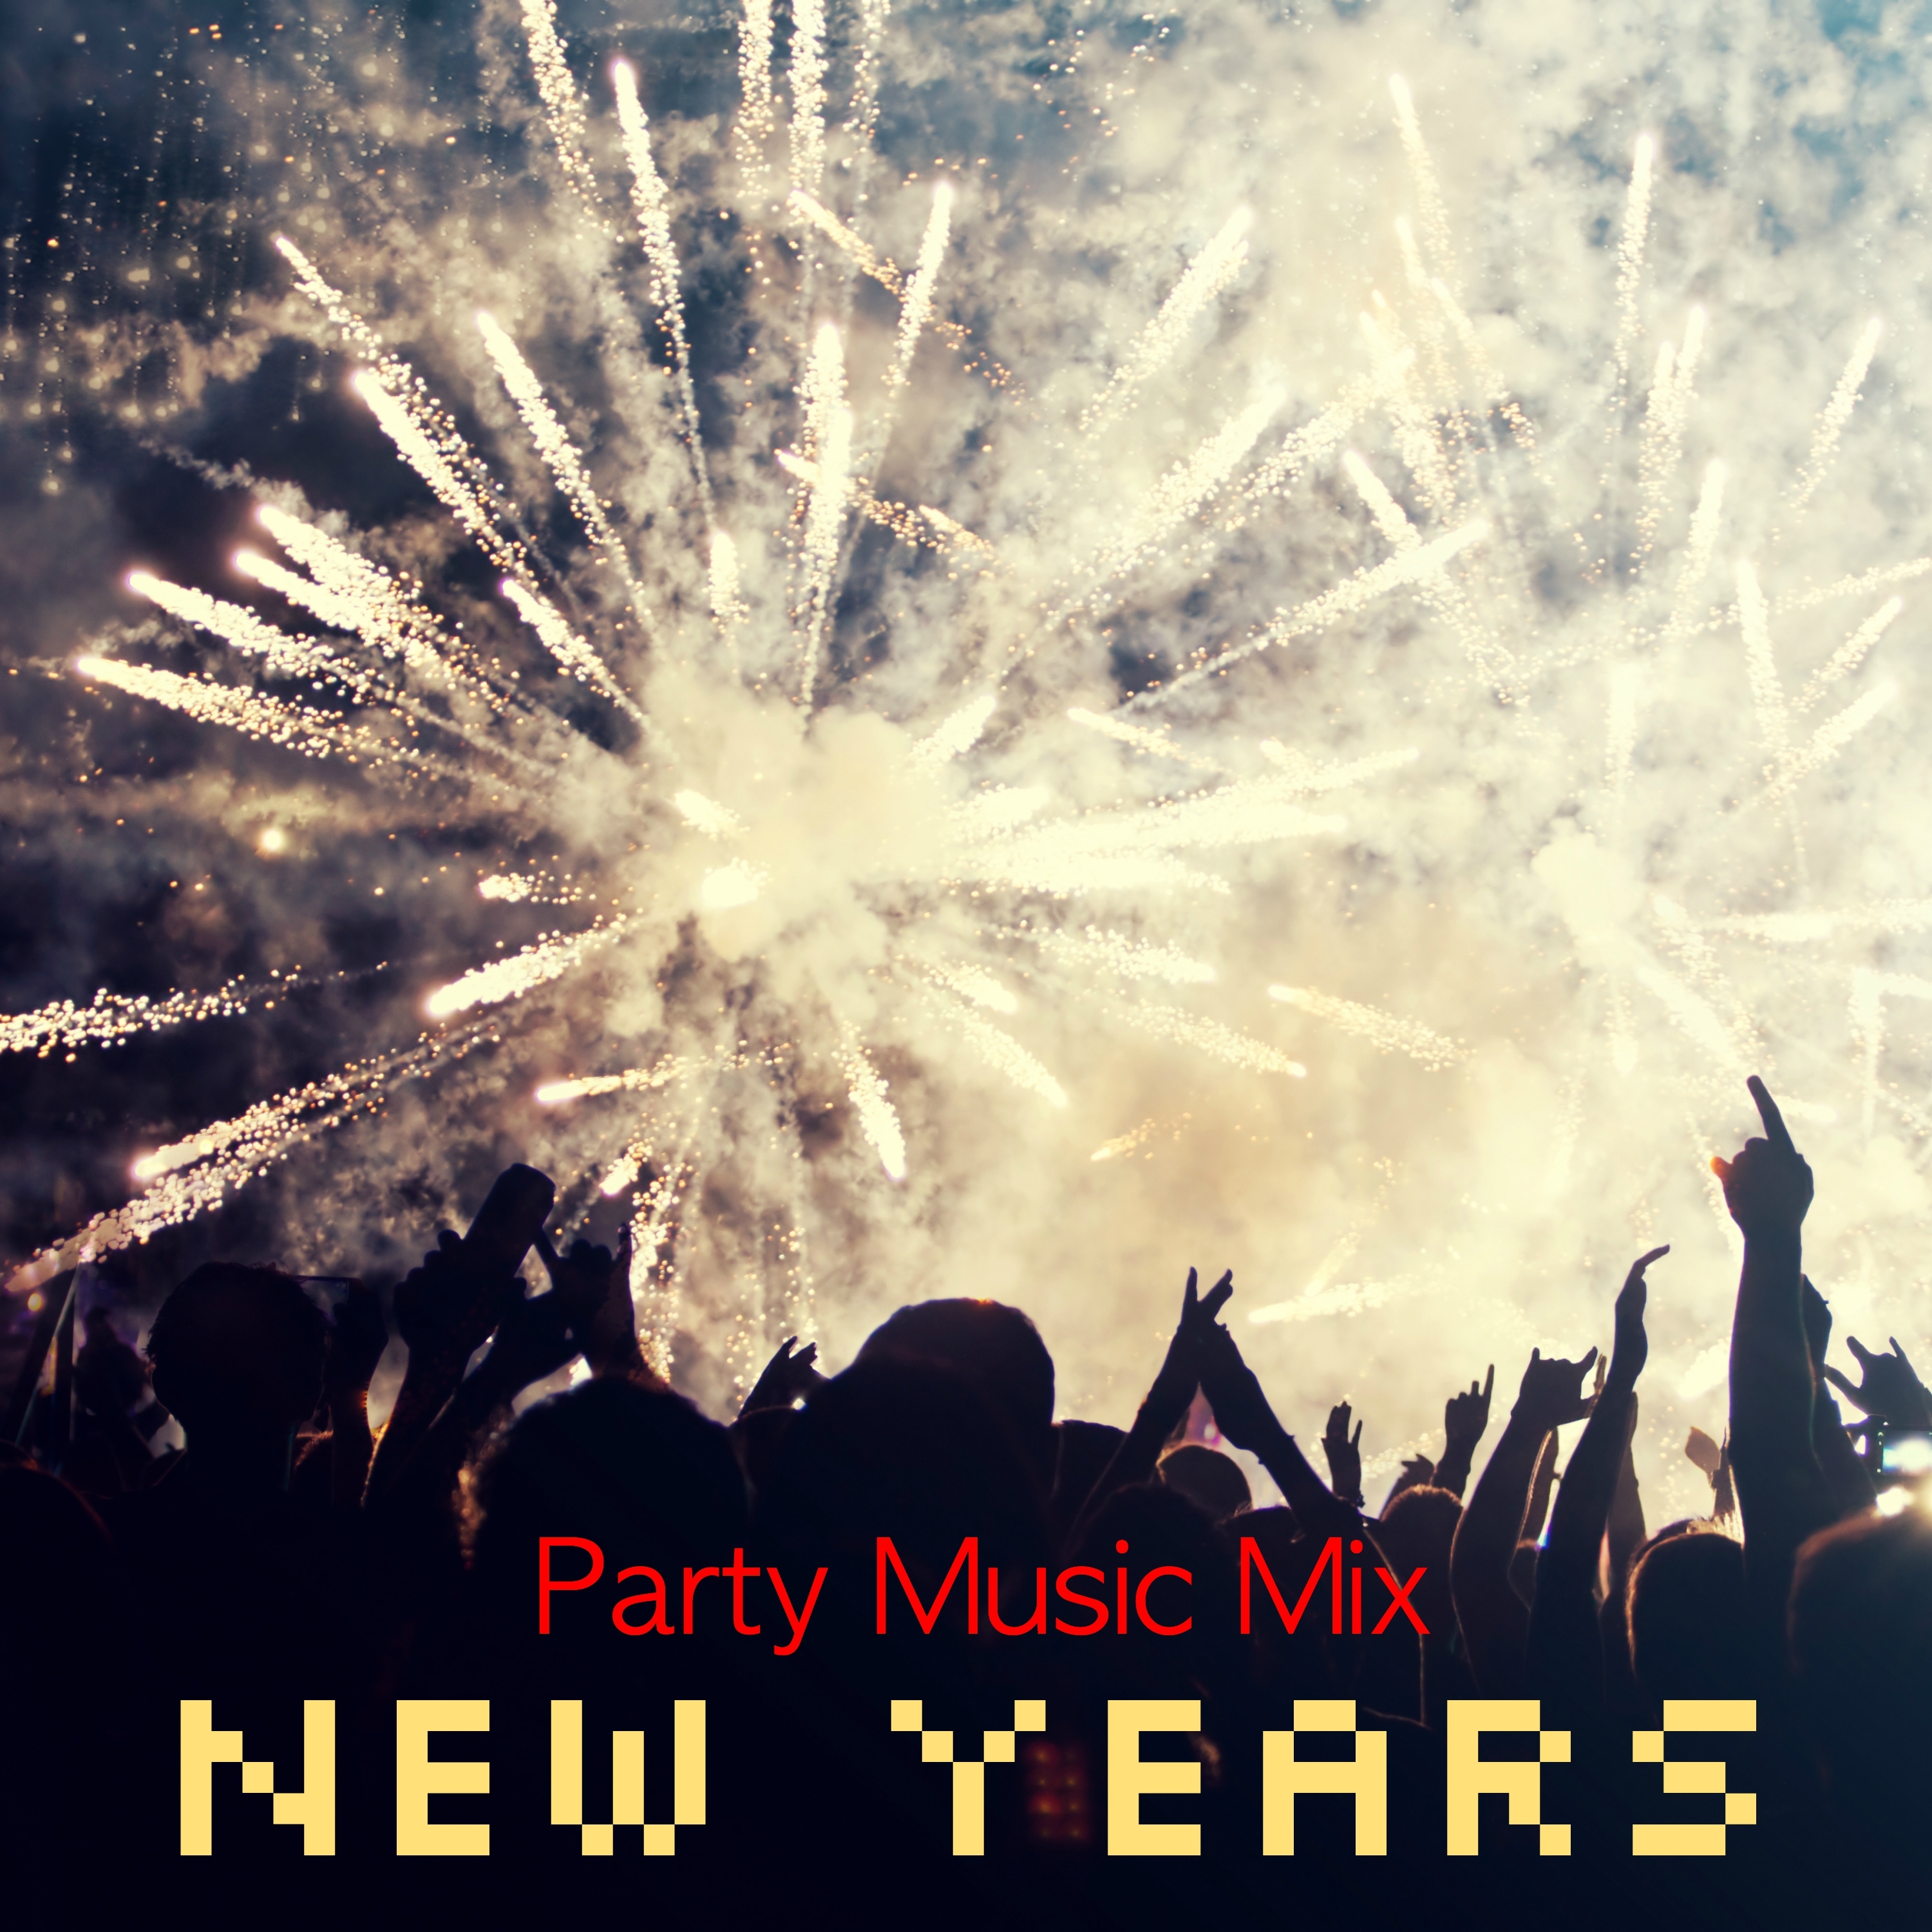 New Years Party Music Mix - Techno House